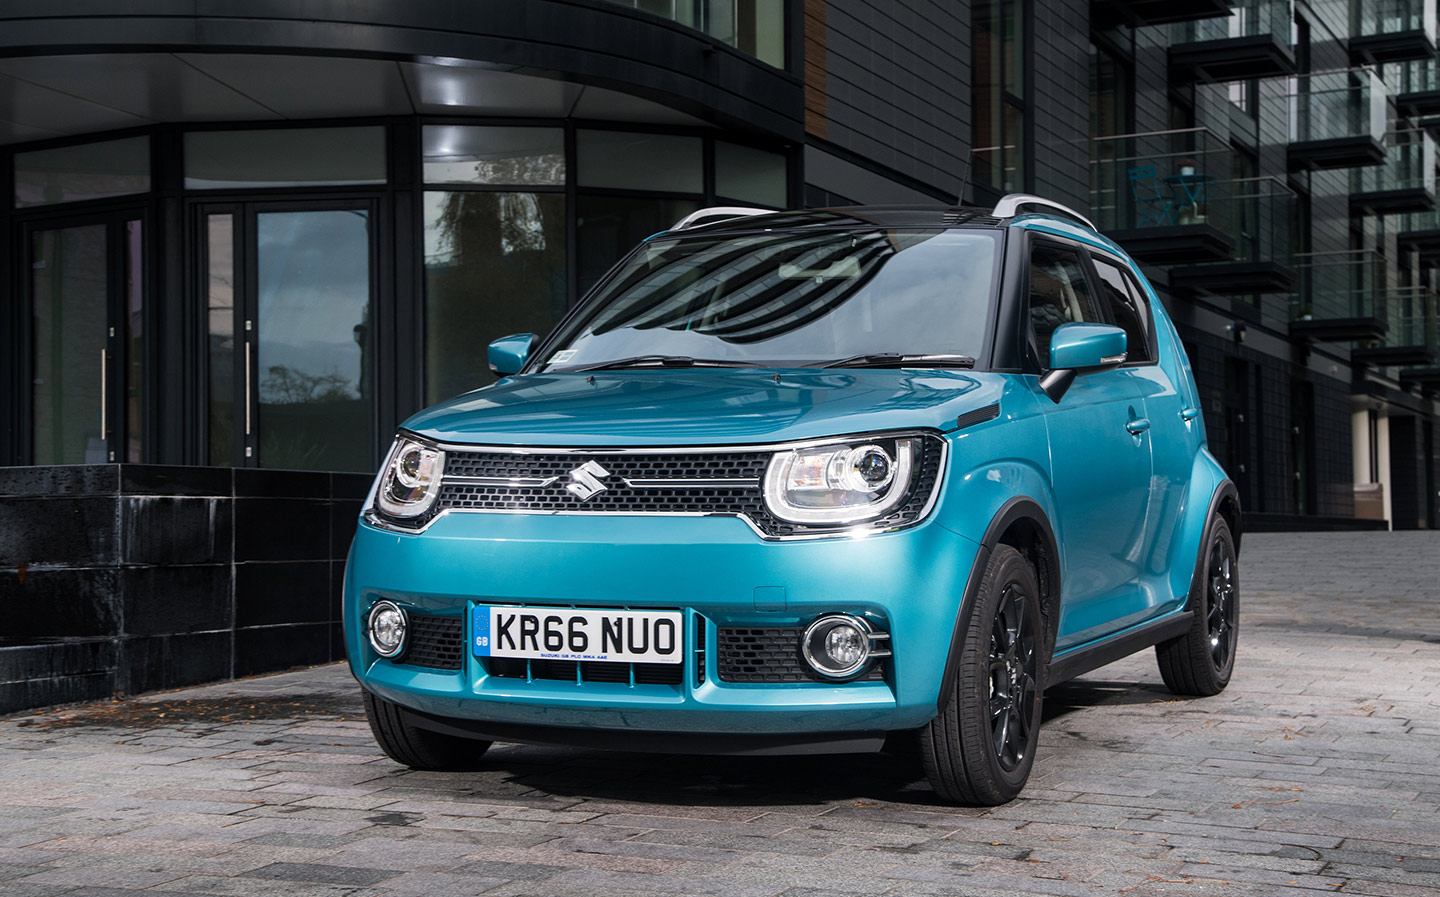 The James May Review: 2017 Suzuki Ignis